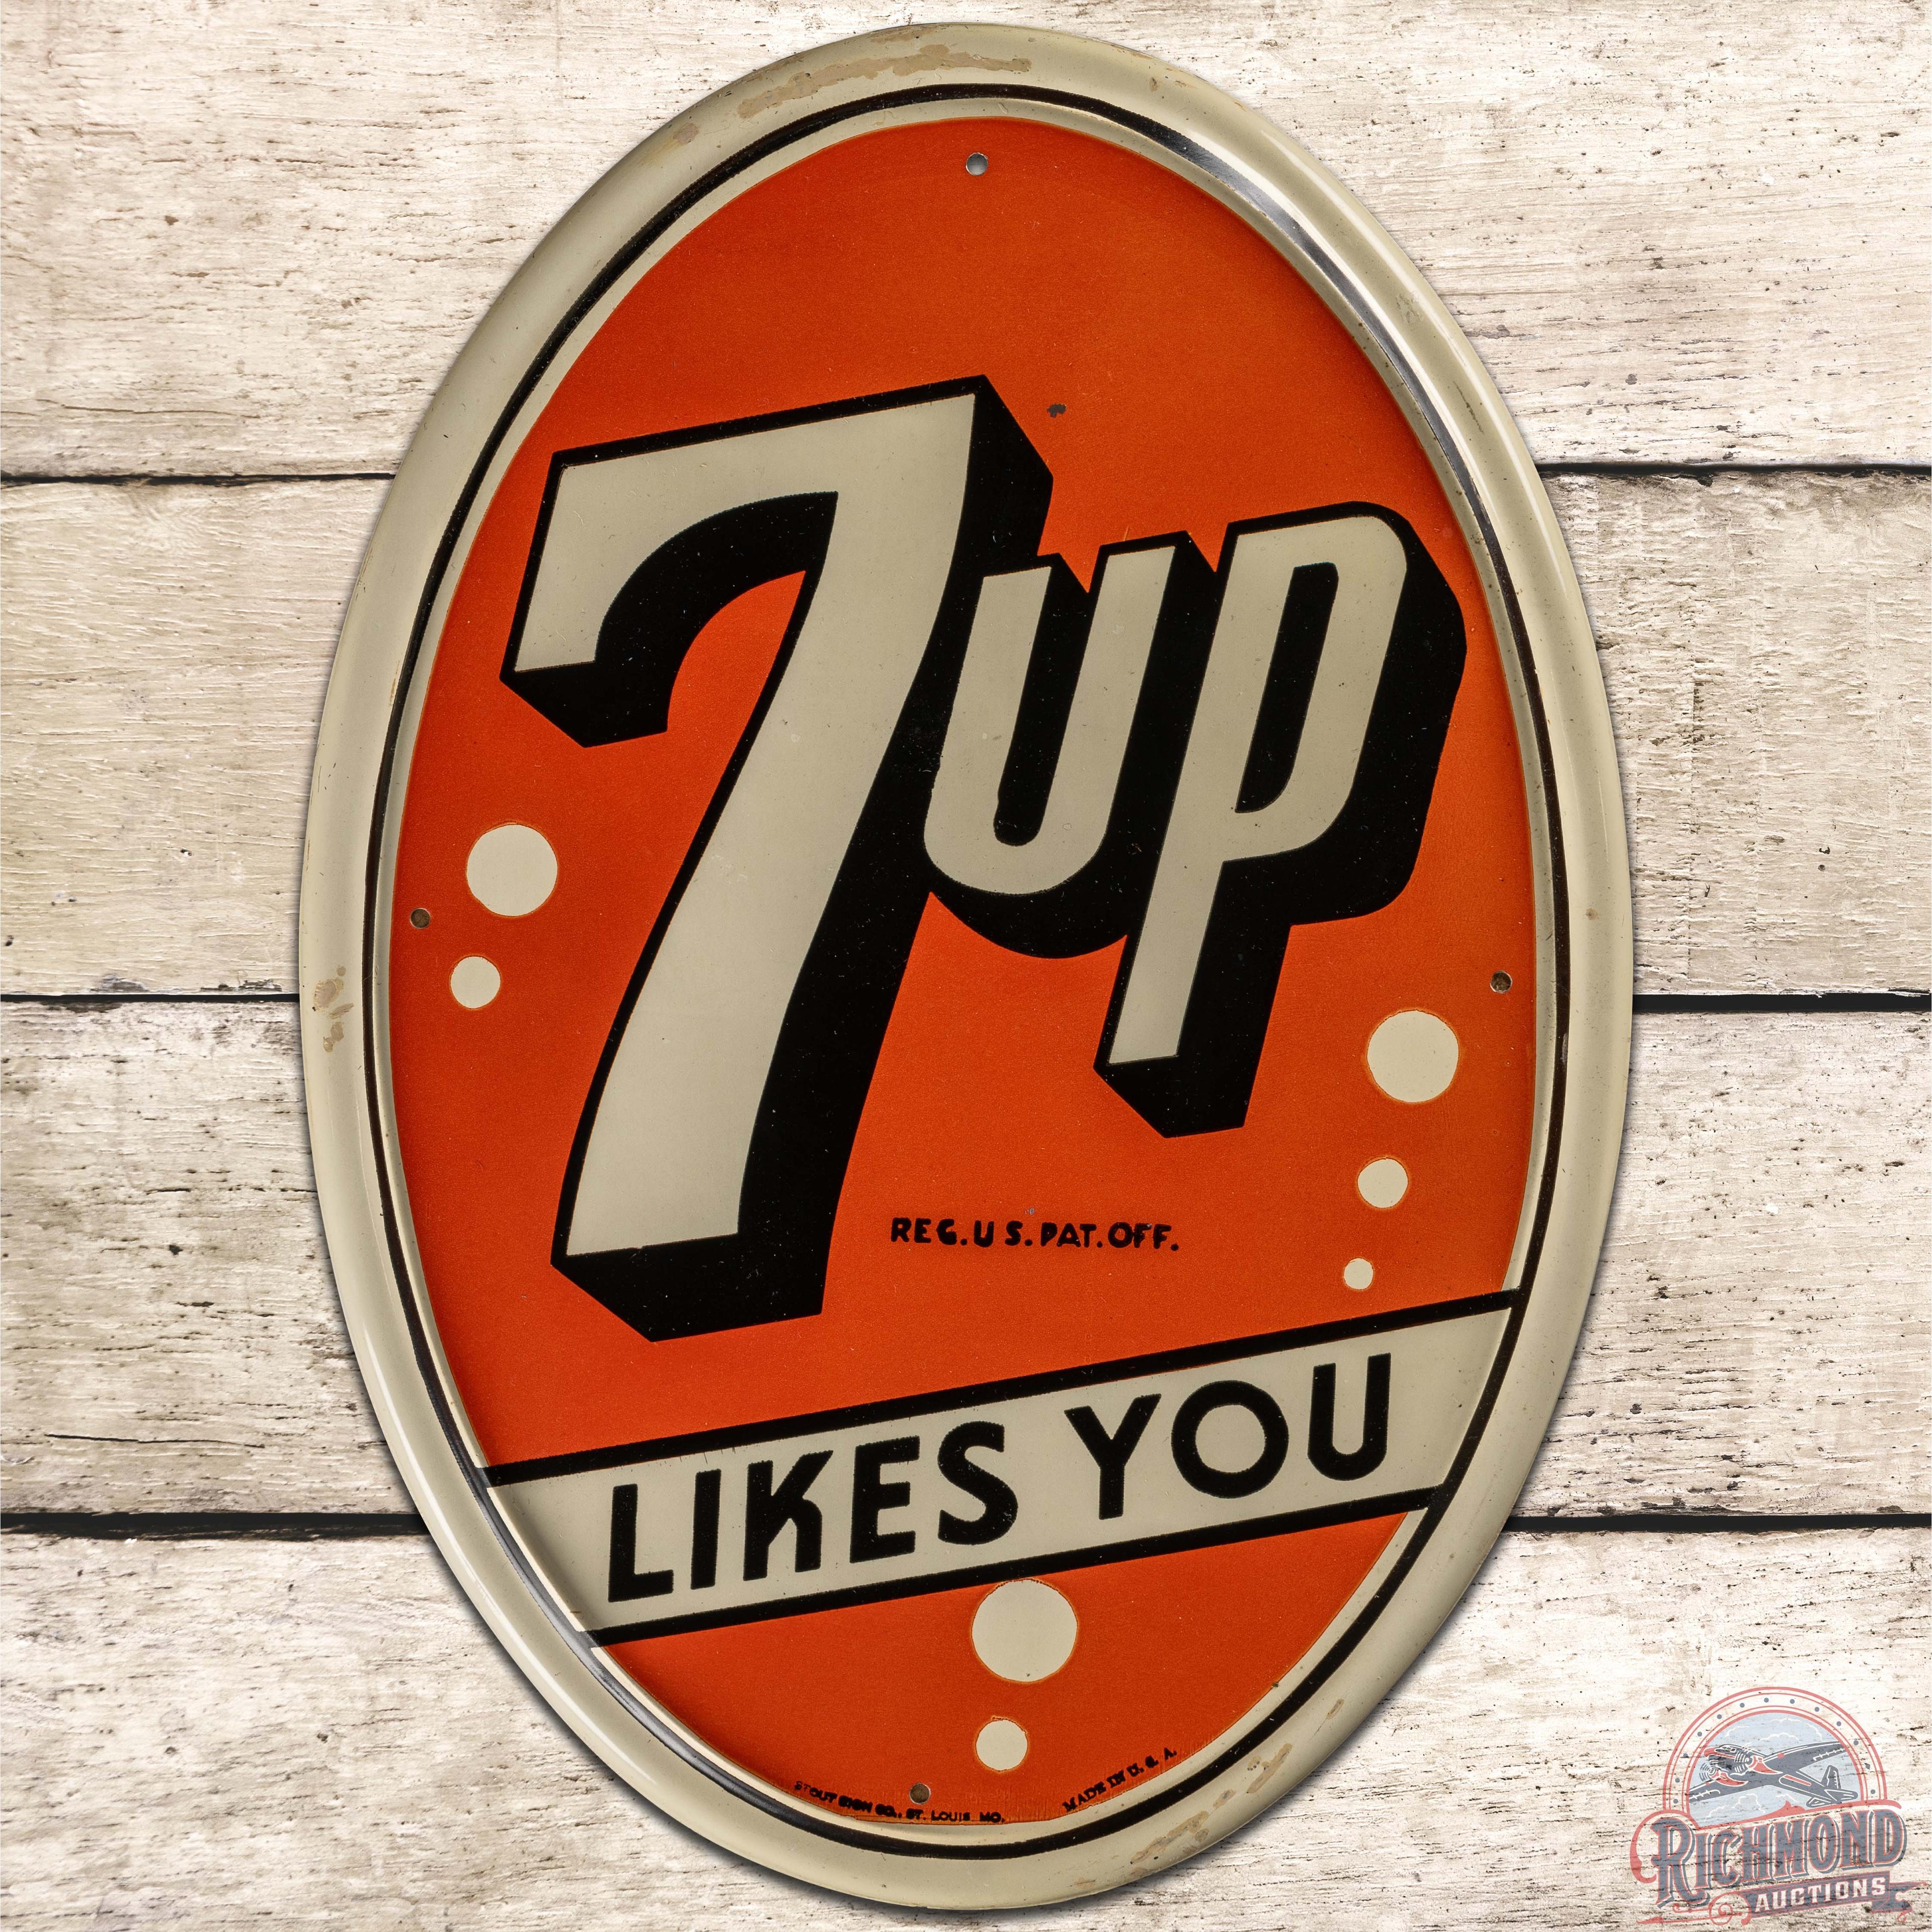 NOS 7up Likes You SS Tin Oval Sign "Small"